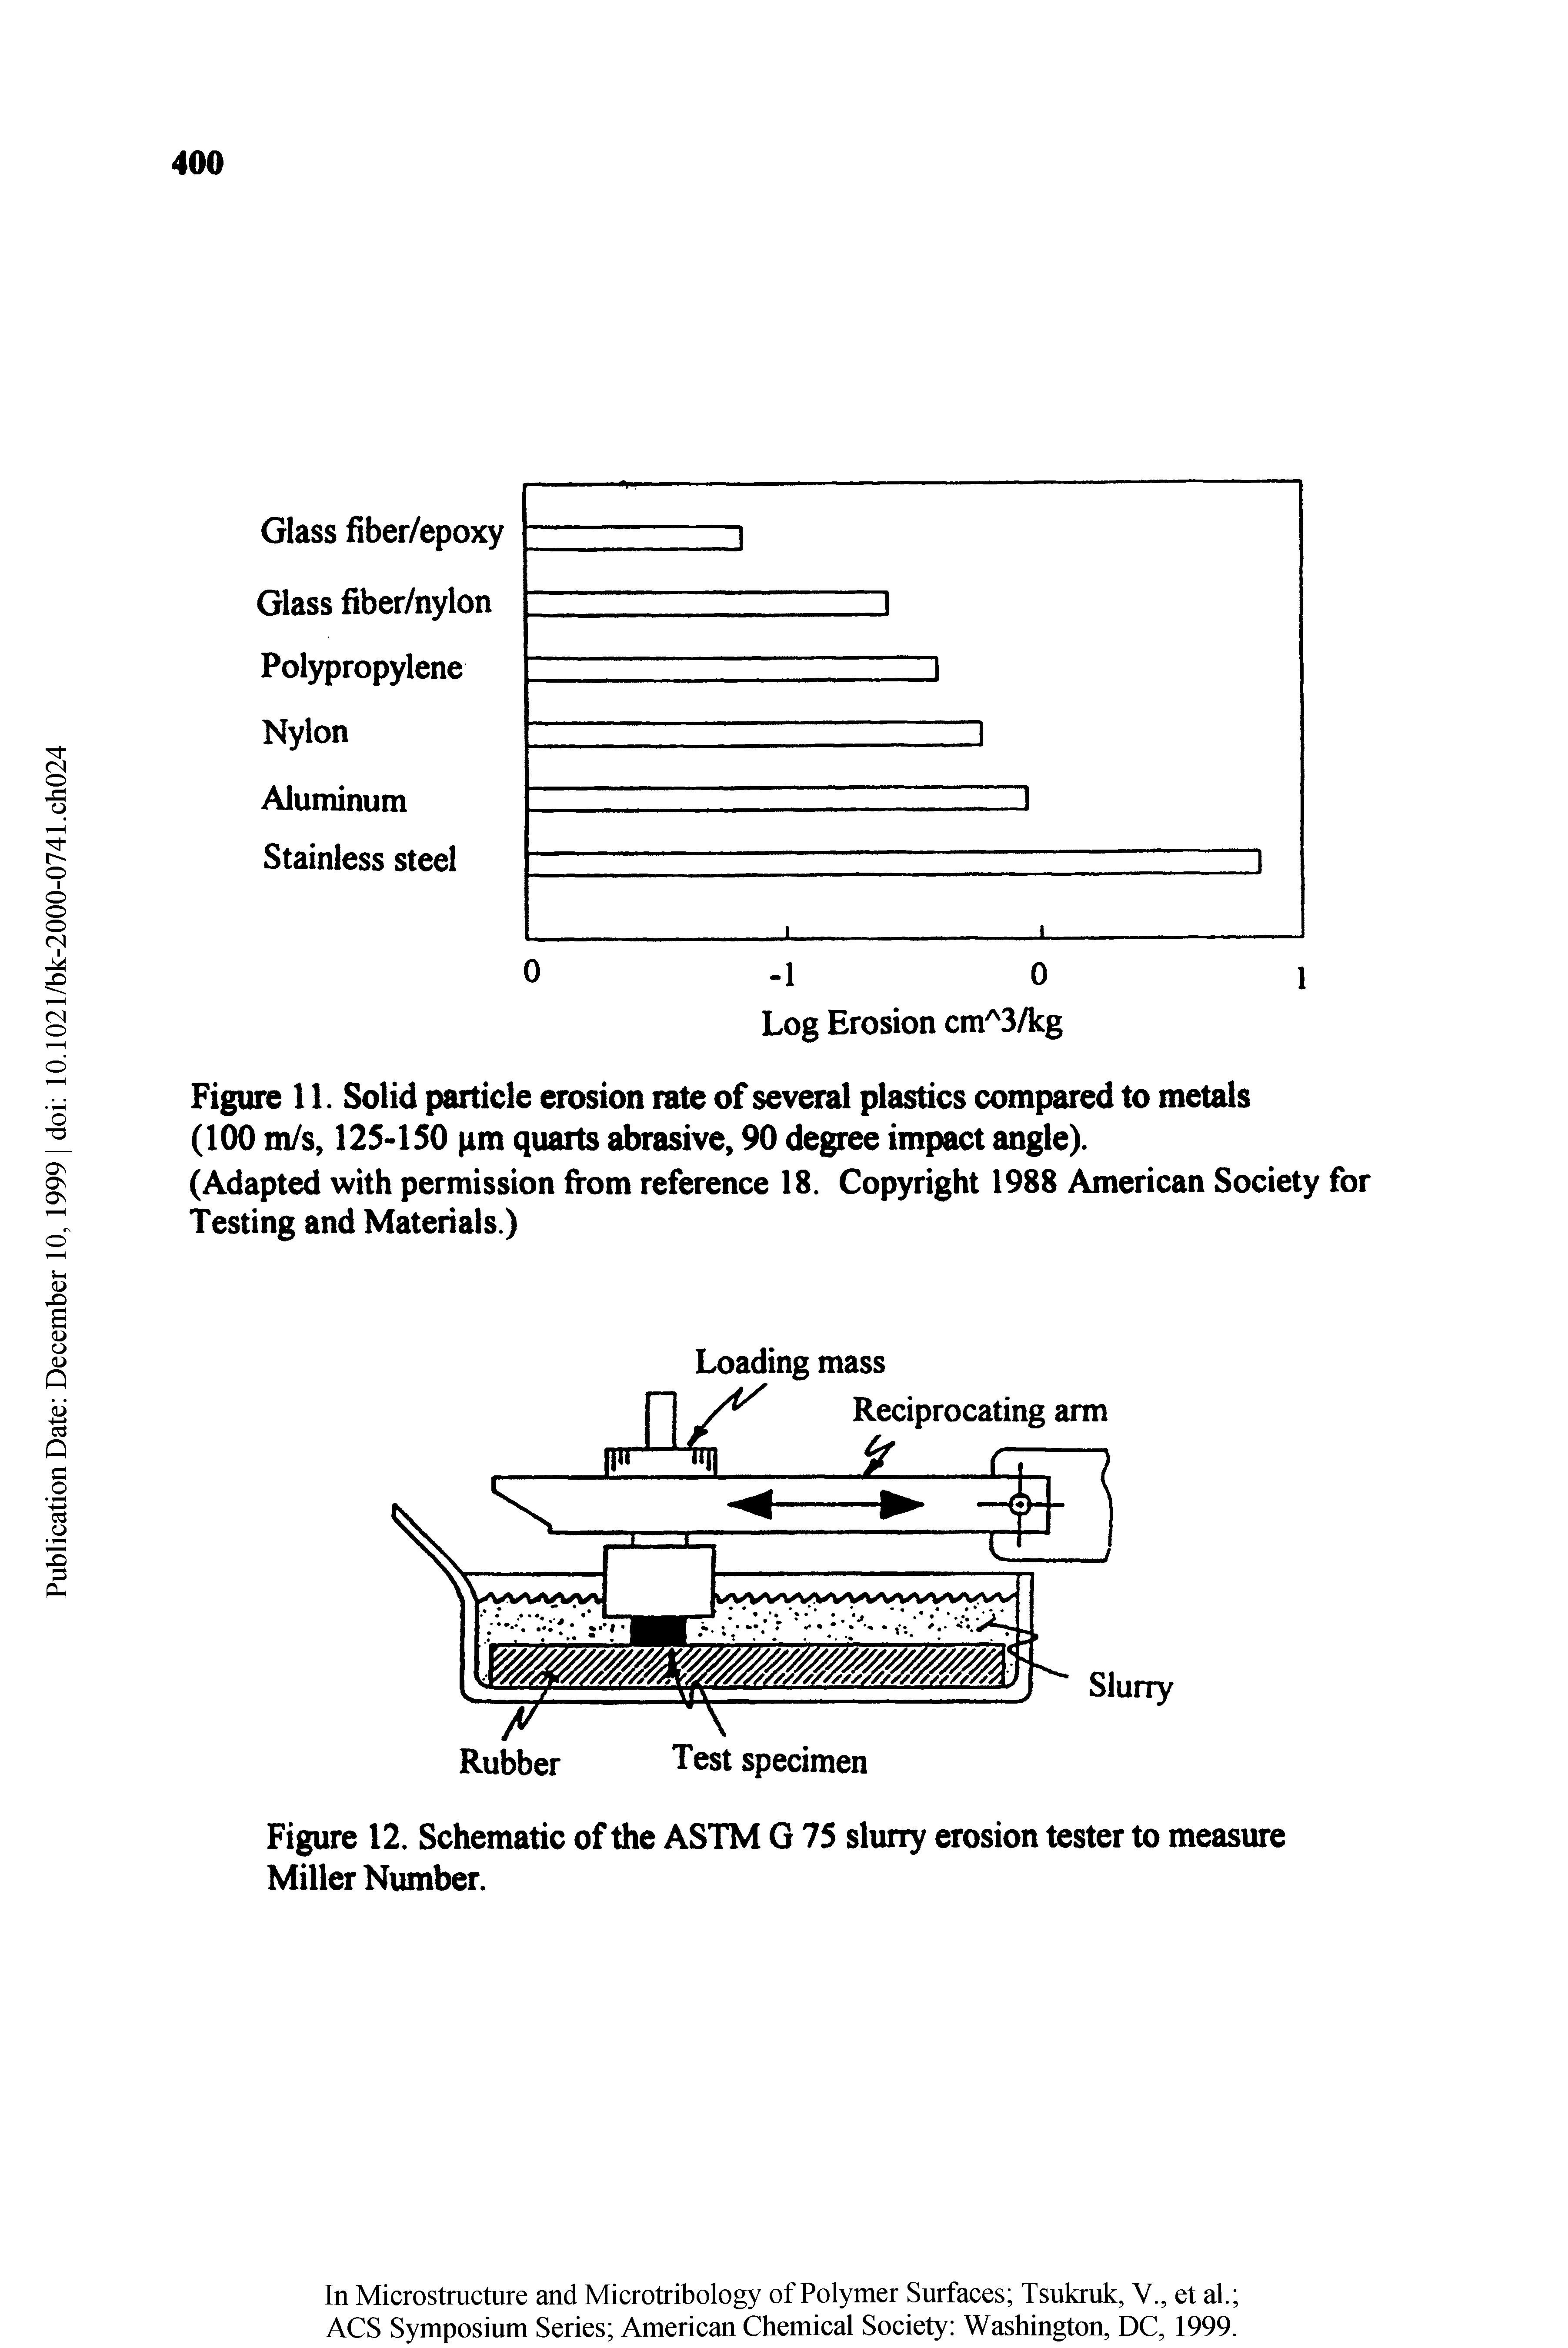 Figure 12. Schematic of the ASTM G 75 slurry erosion tester to measure Miller Number.